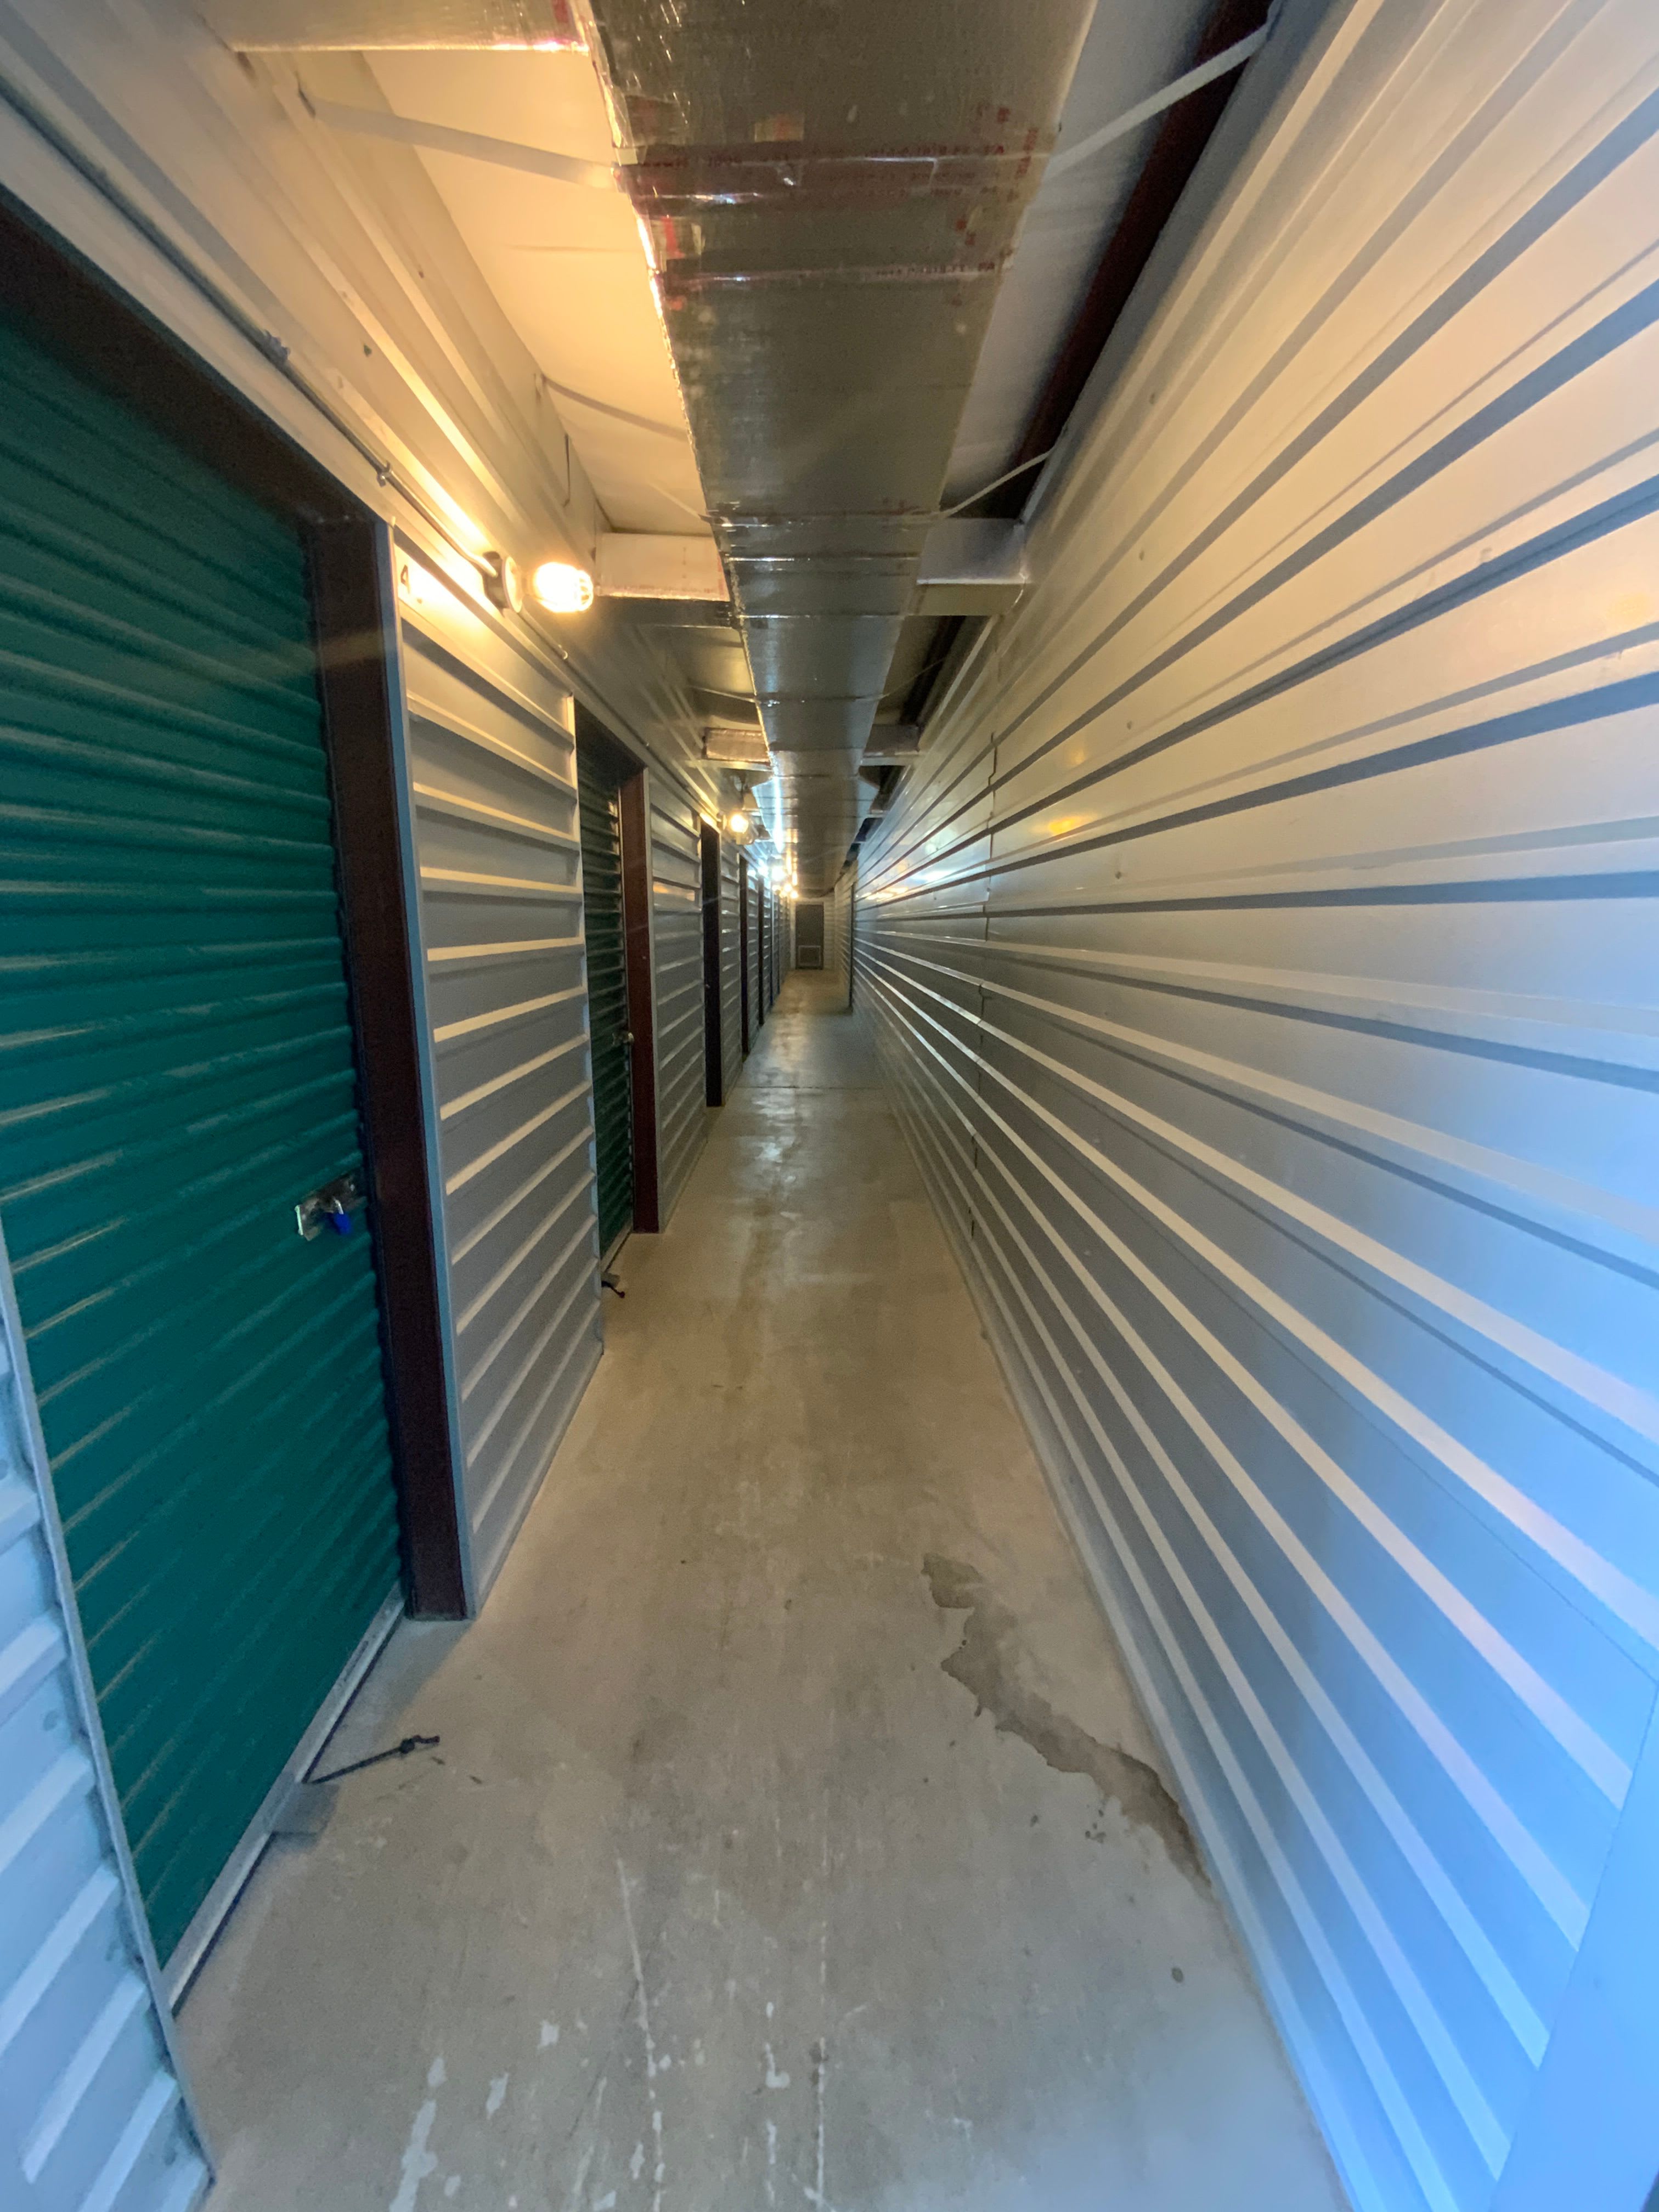 View our features at KO Storage in Harlingen, Texas